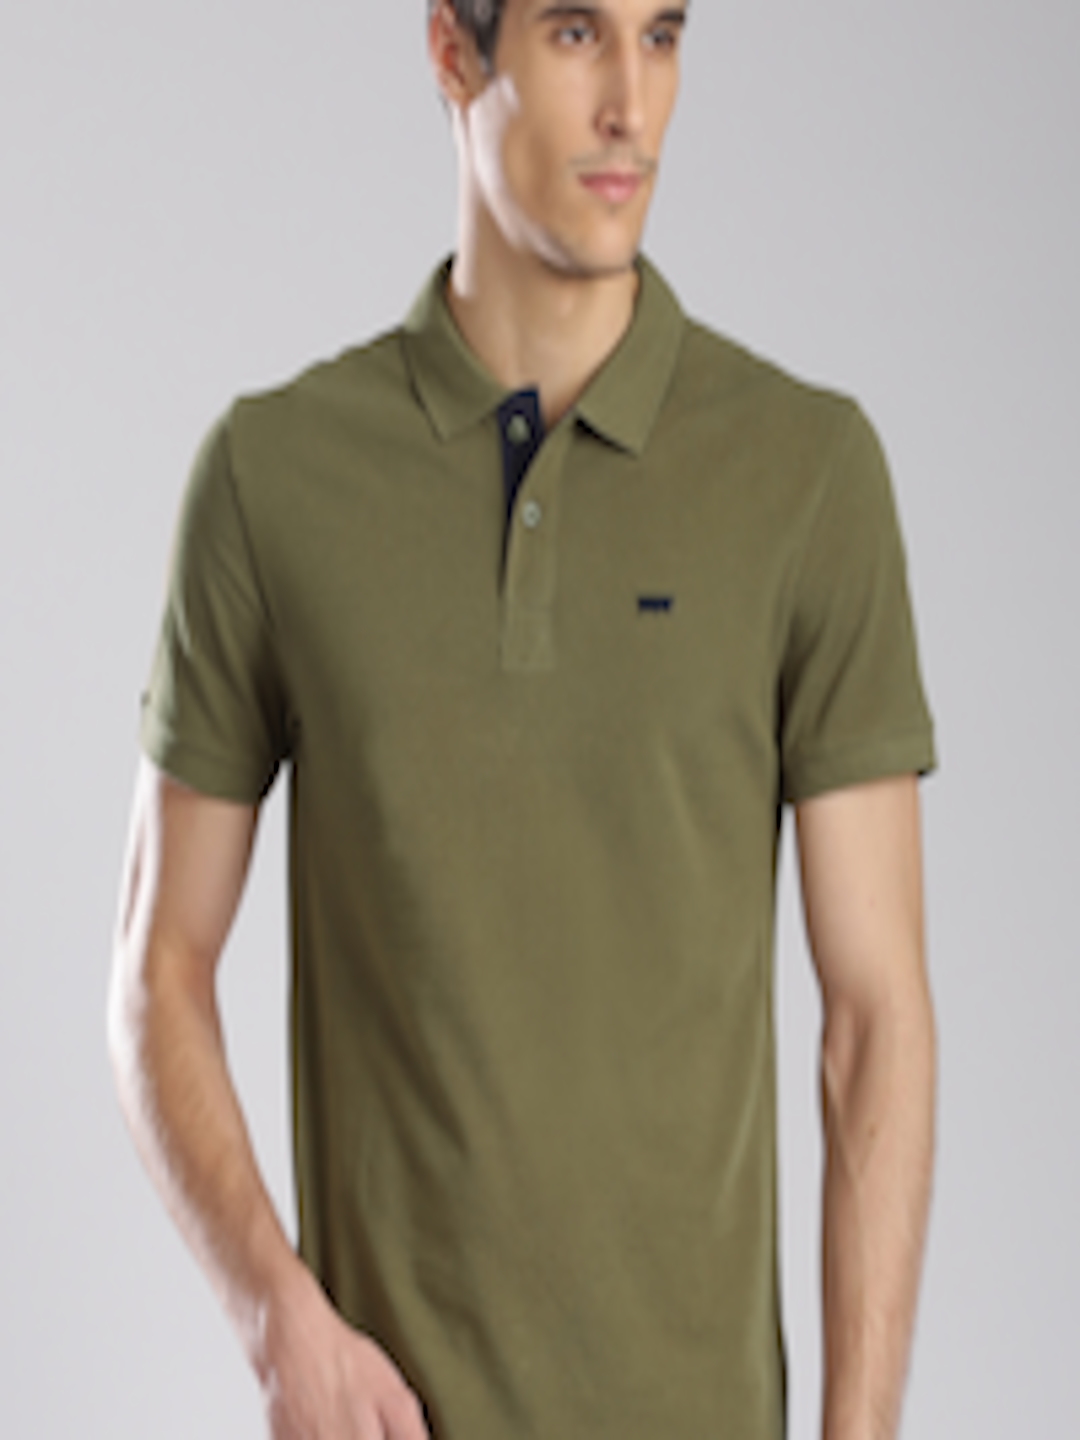 Buy Levis Men Olive Green Solid Polo T Shirt - Tshirts for Men 1460565 ...